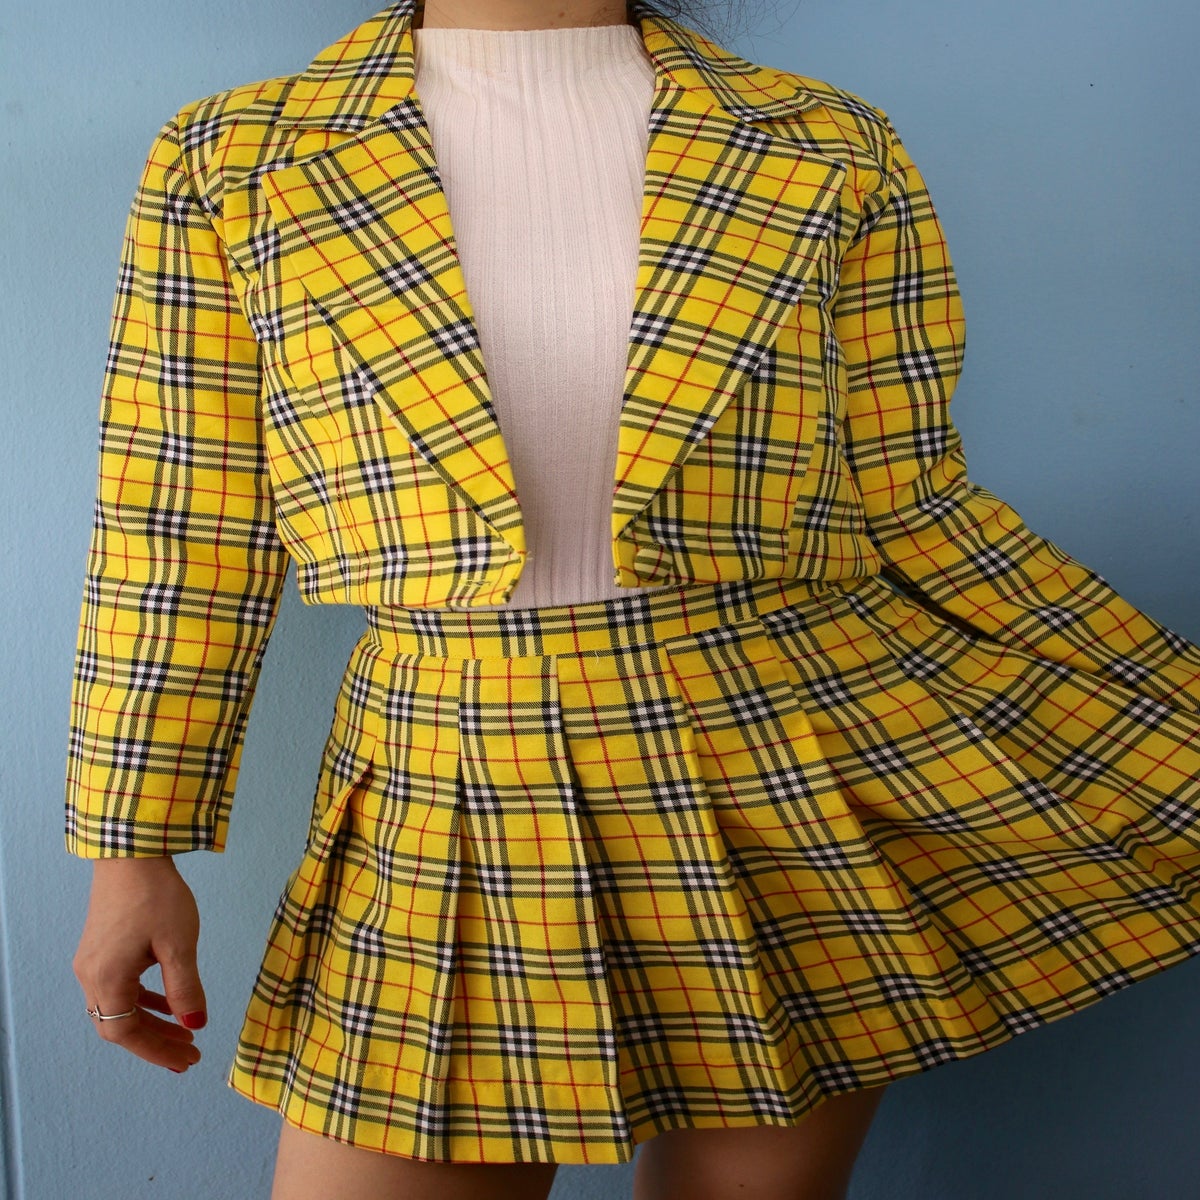 Glitters For Dinner — Clueless Inspired Tartan Outfits